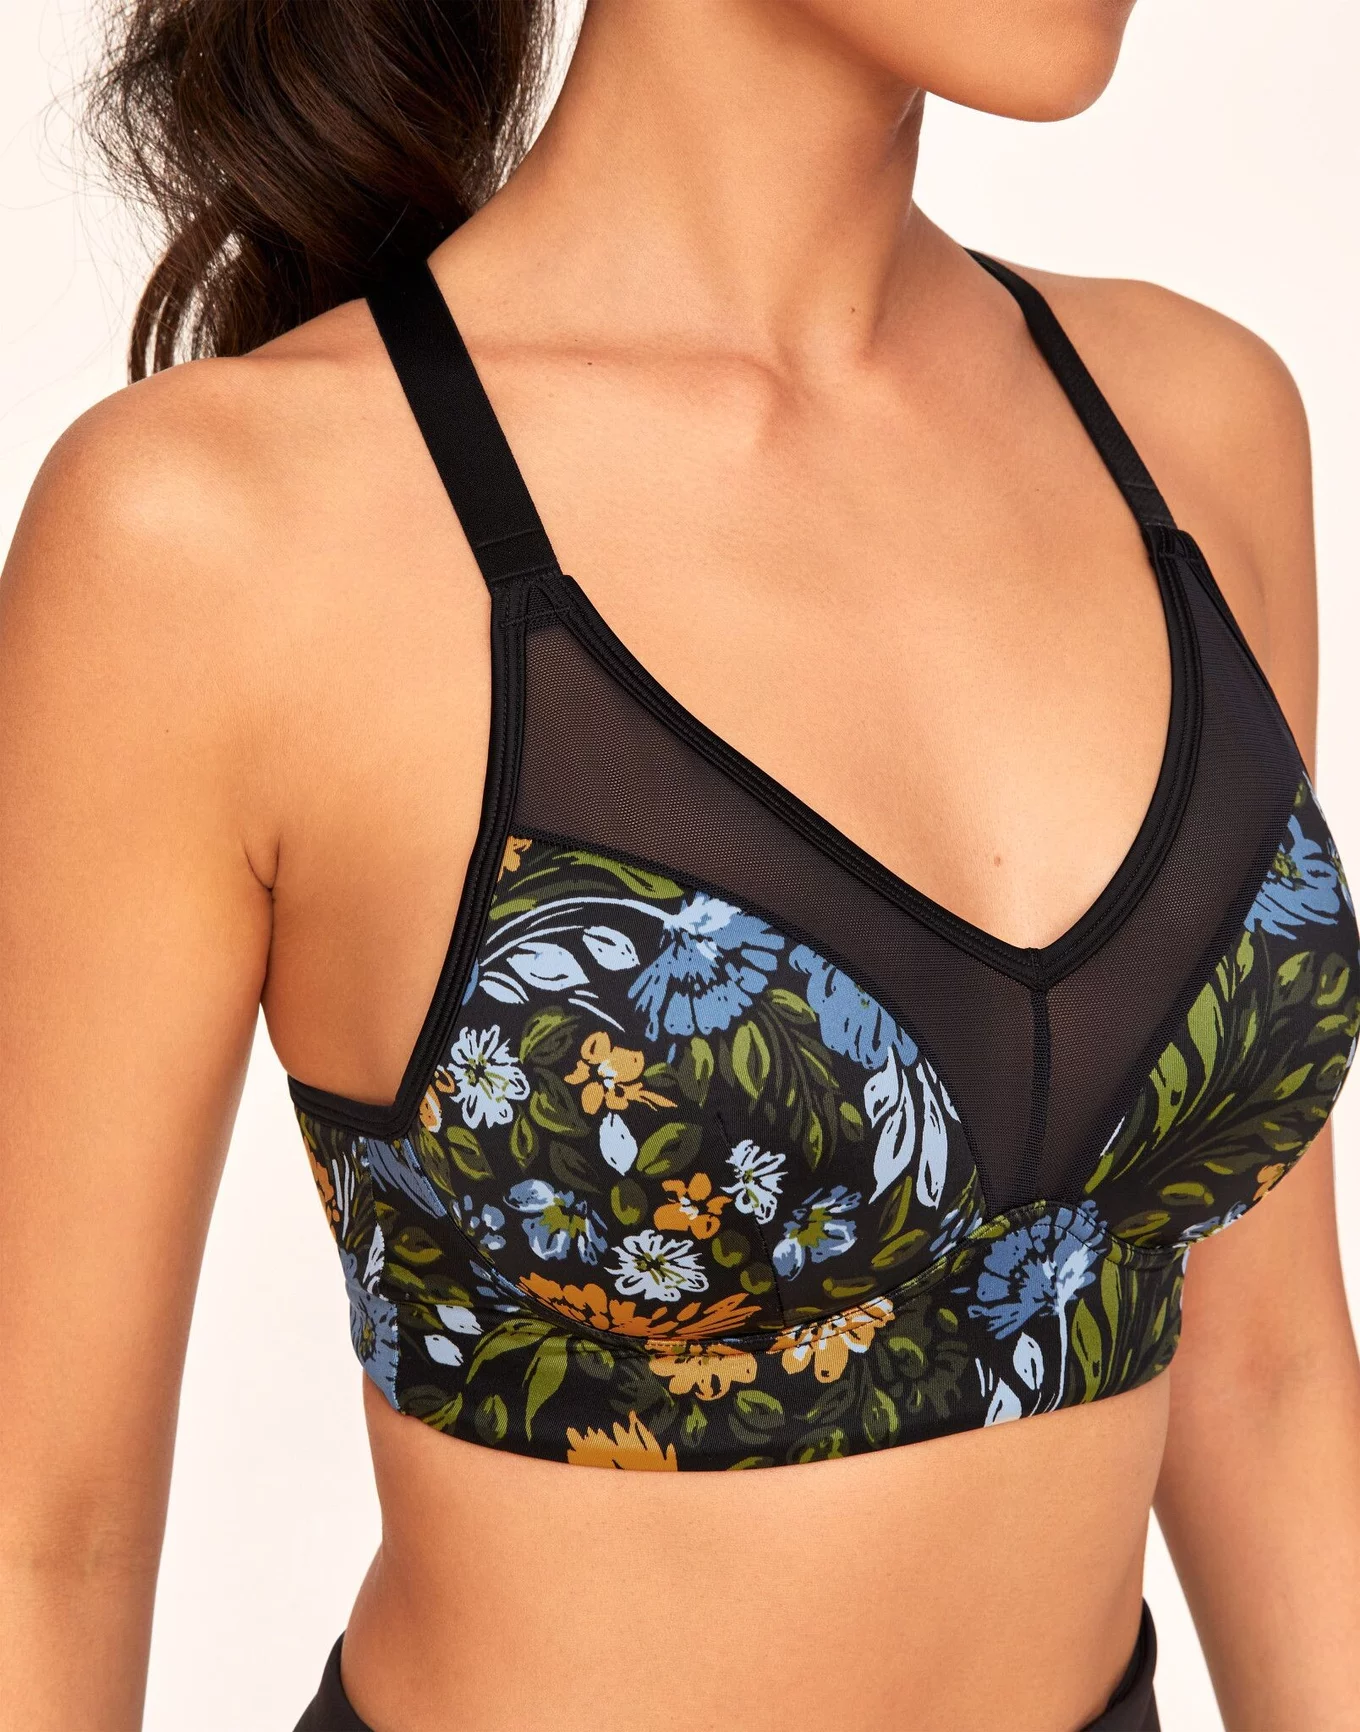 LLG ART FLOWERS: (7 Choices) Ladies Sports Bra. All-Over Print. Black or  White Outline w. Logo on Back — Ladies' Life Guide